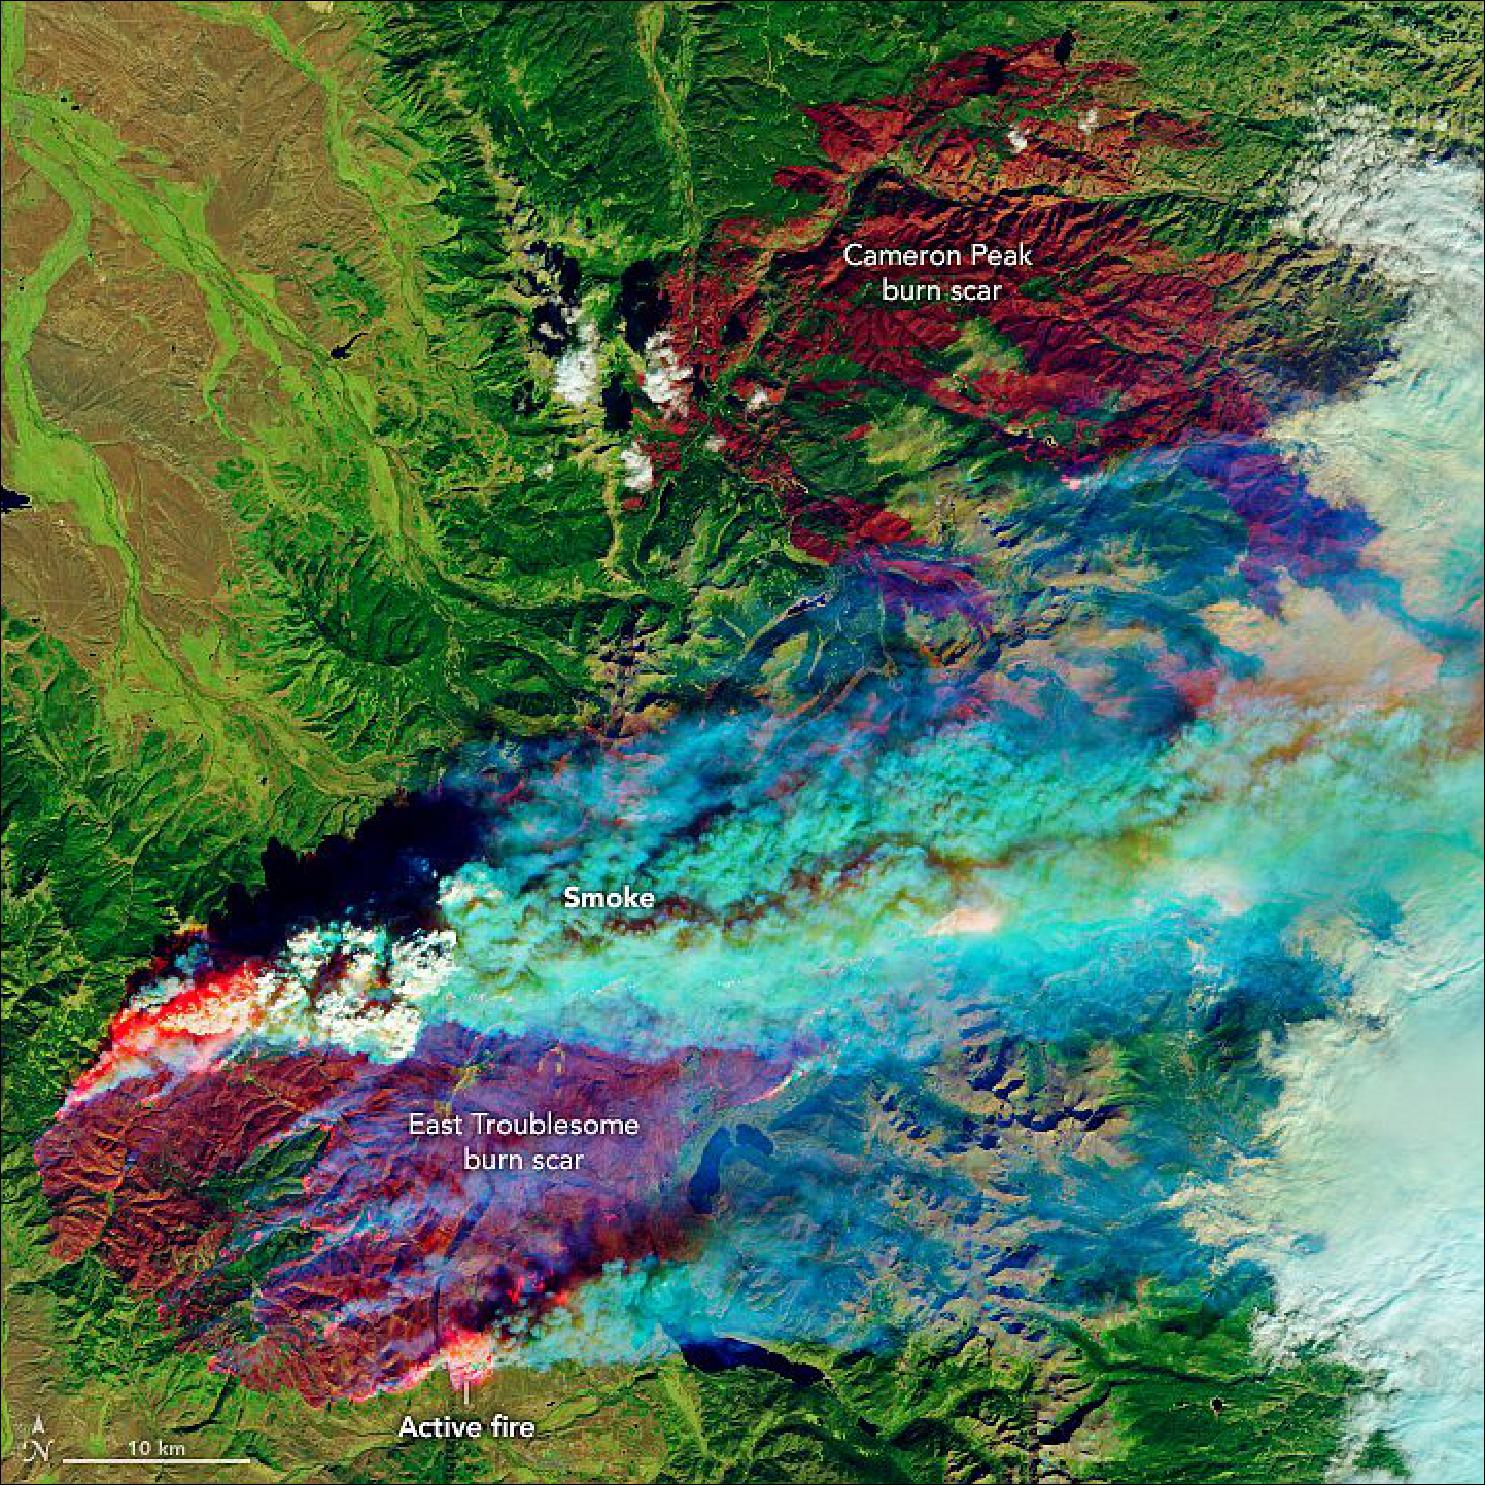 Figure 23: On October 22, OLI on Landsat-8 captured this false-color image of the East Troublesome fire. The image combines shortwave infrared, near-infrared, and green light (bands 7-5-2) to show active fires (bright red), scarred land consumed by fire (darker red), and intact vegetation (green), image credit: NASA Earth Observatory image by Lauren Dauphin, using Landsat data from the U.S. Geological Survey. Story by Kasha Patel)